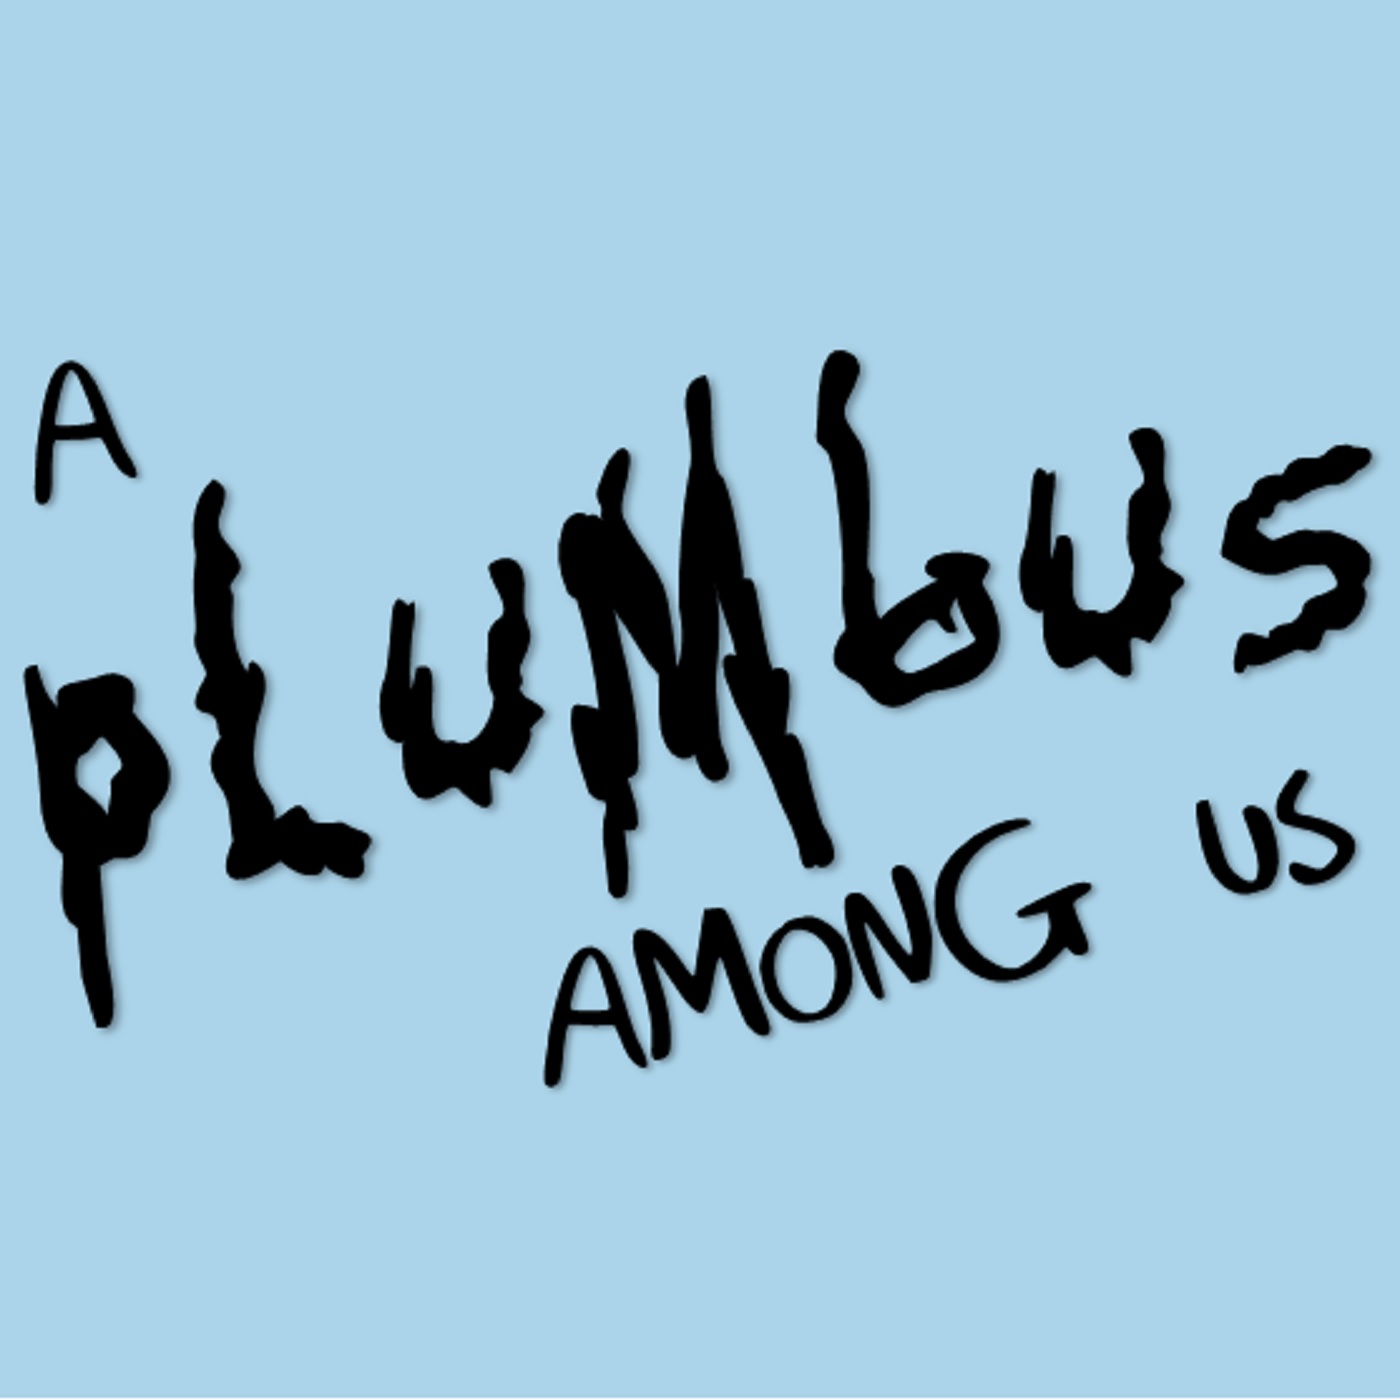 A Plumbus Among Us - Ep 301 (Rick and Morty podcast Holiday Preview)